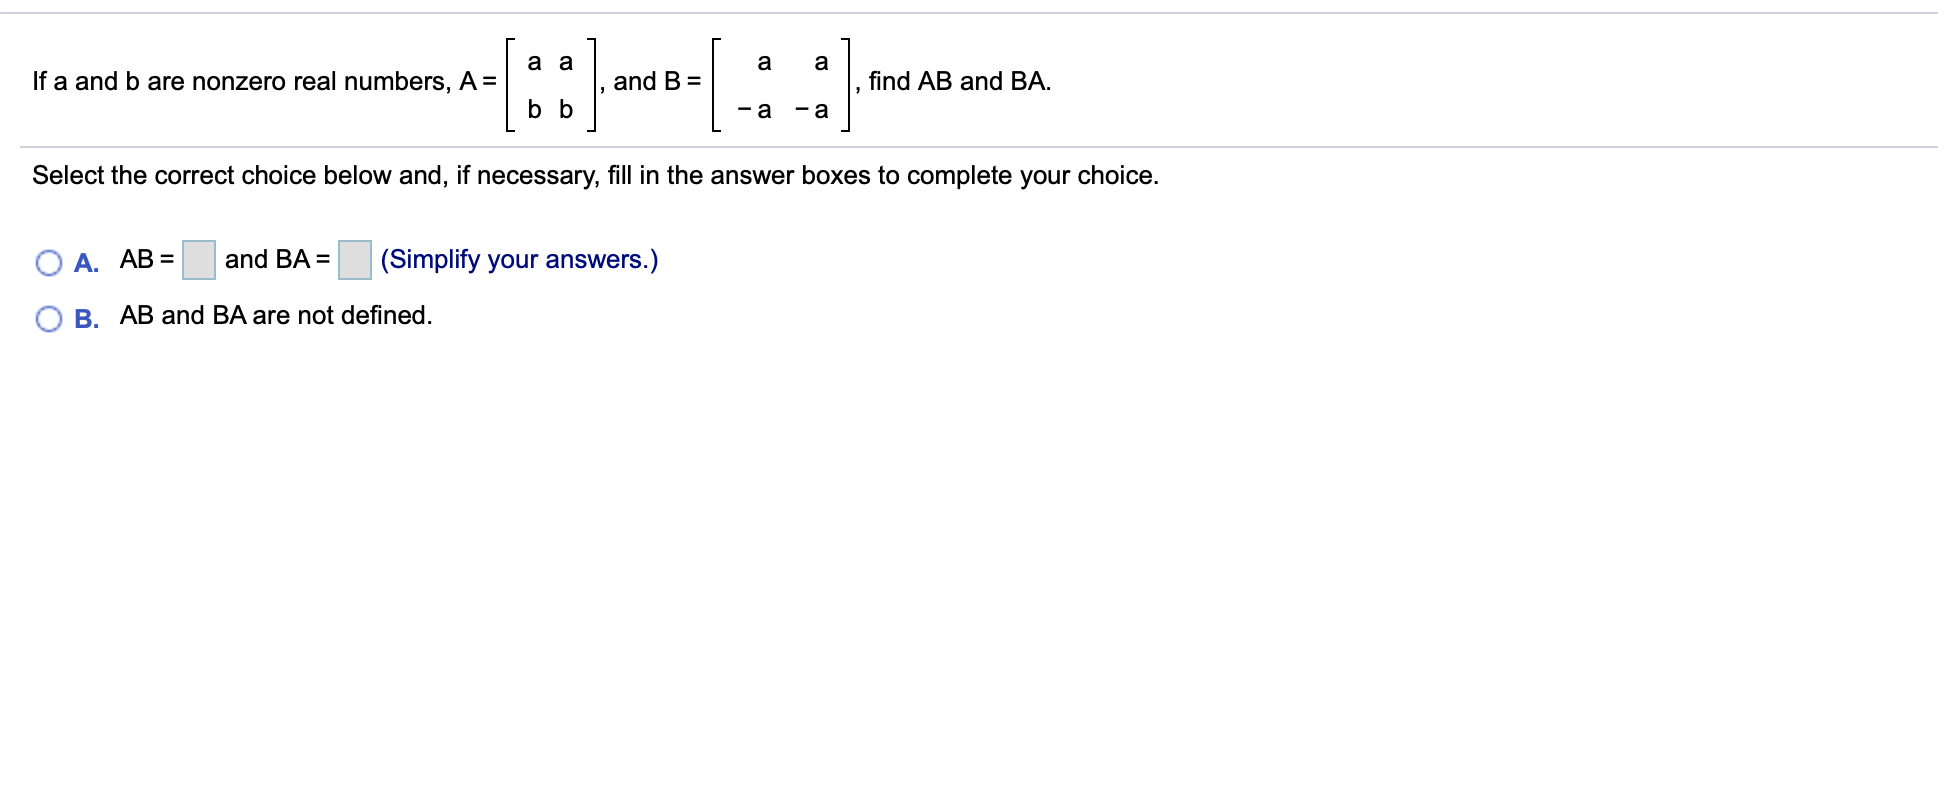 а
find AB and BA
and B
If a and b are nonzero real numbers, A =
b b
a
-a
Select the correct choice below and, if necessary, fill in the answer boxes to complete your choice.
О А. АВ %3
and BA =
(Simplify your answers.)
B
AB and BA are not defined
CO
